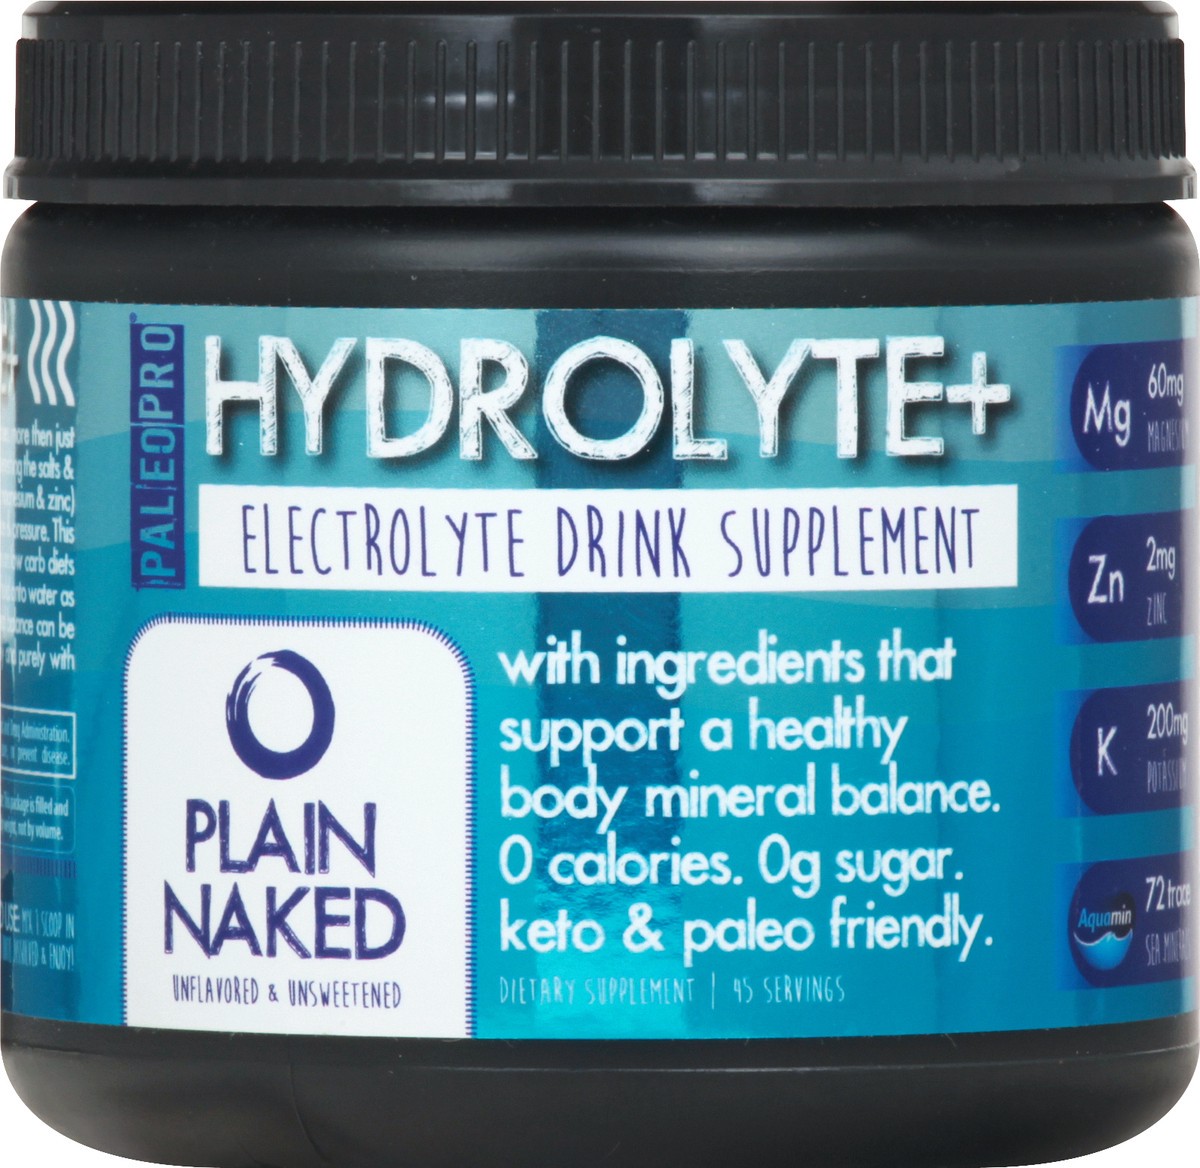 slide 5 of 13, Hydrolyte + Electrolyte Unflavored & Unsweetened Plain Naked Drink Supplement 1 ea, 6.3 oz